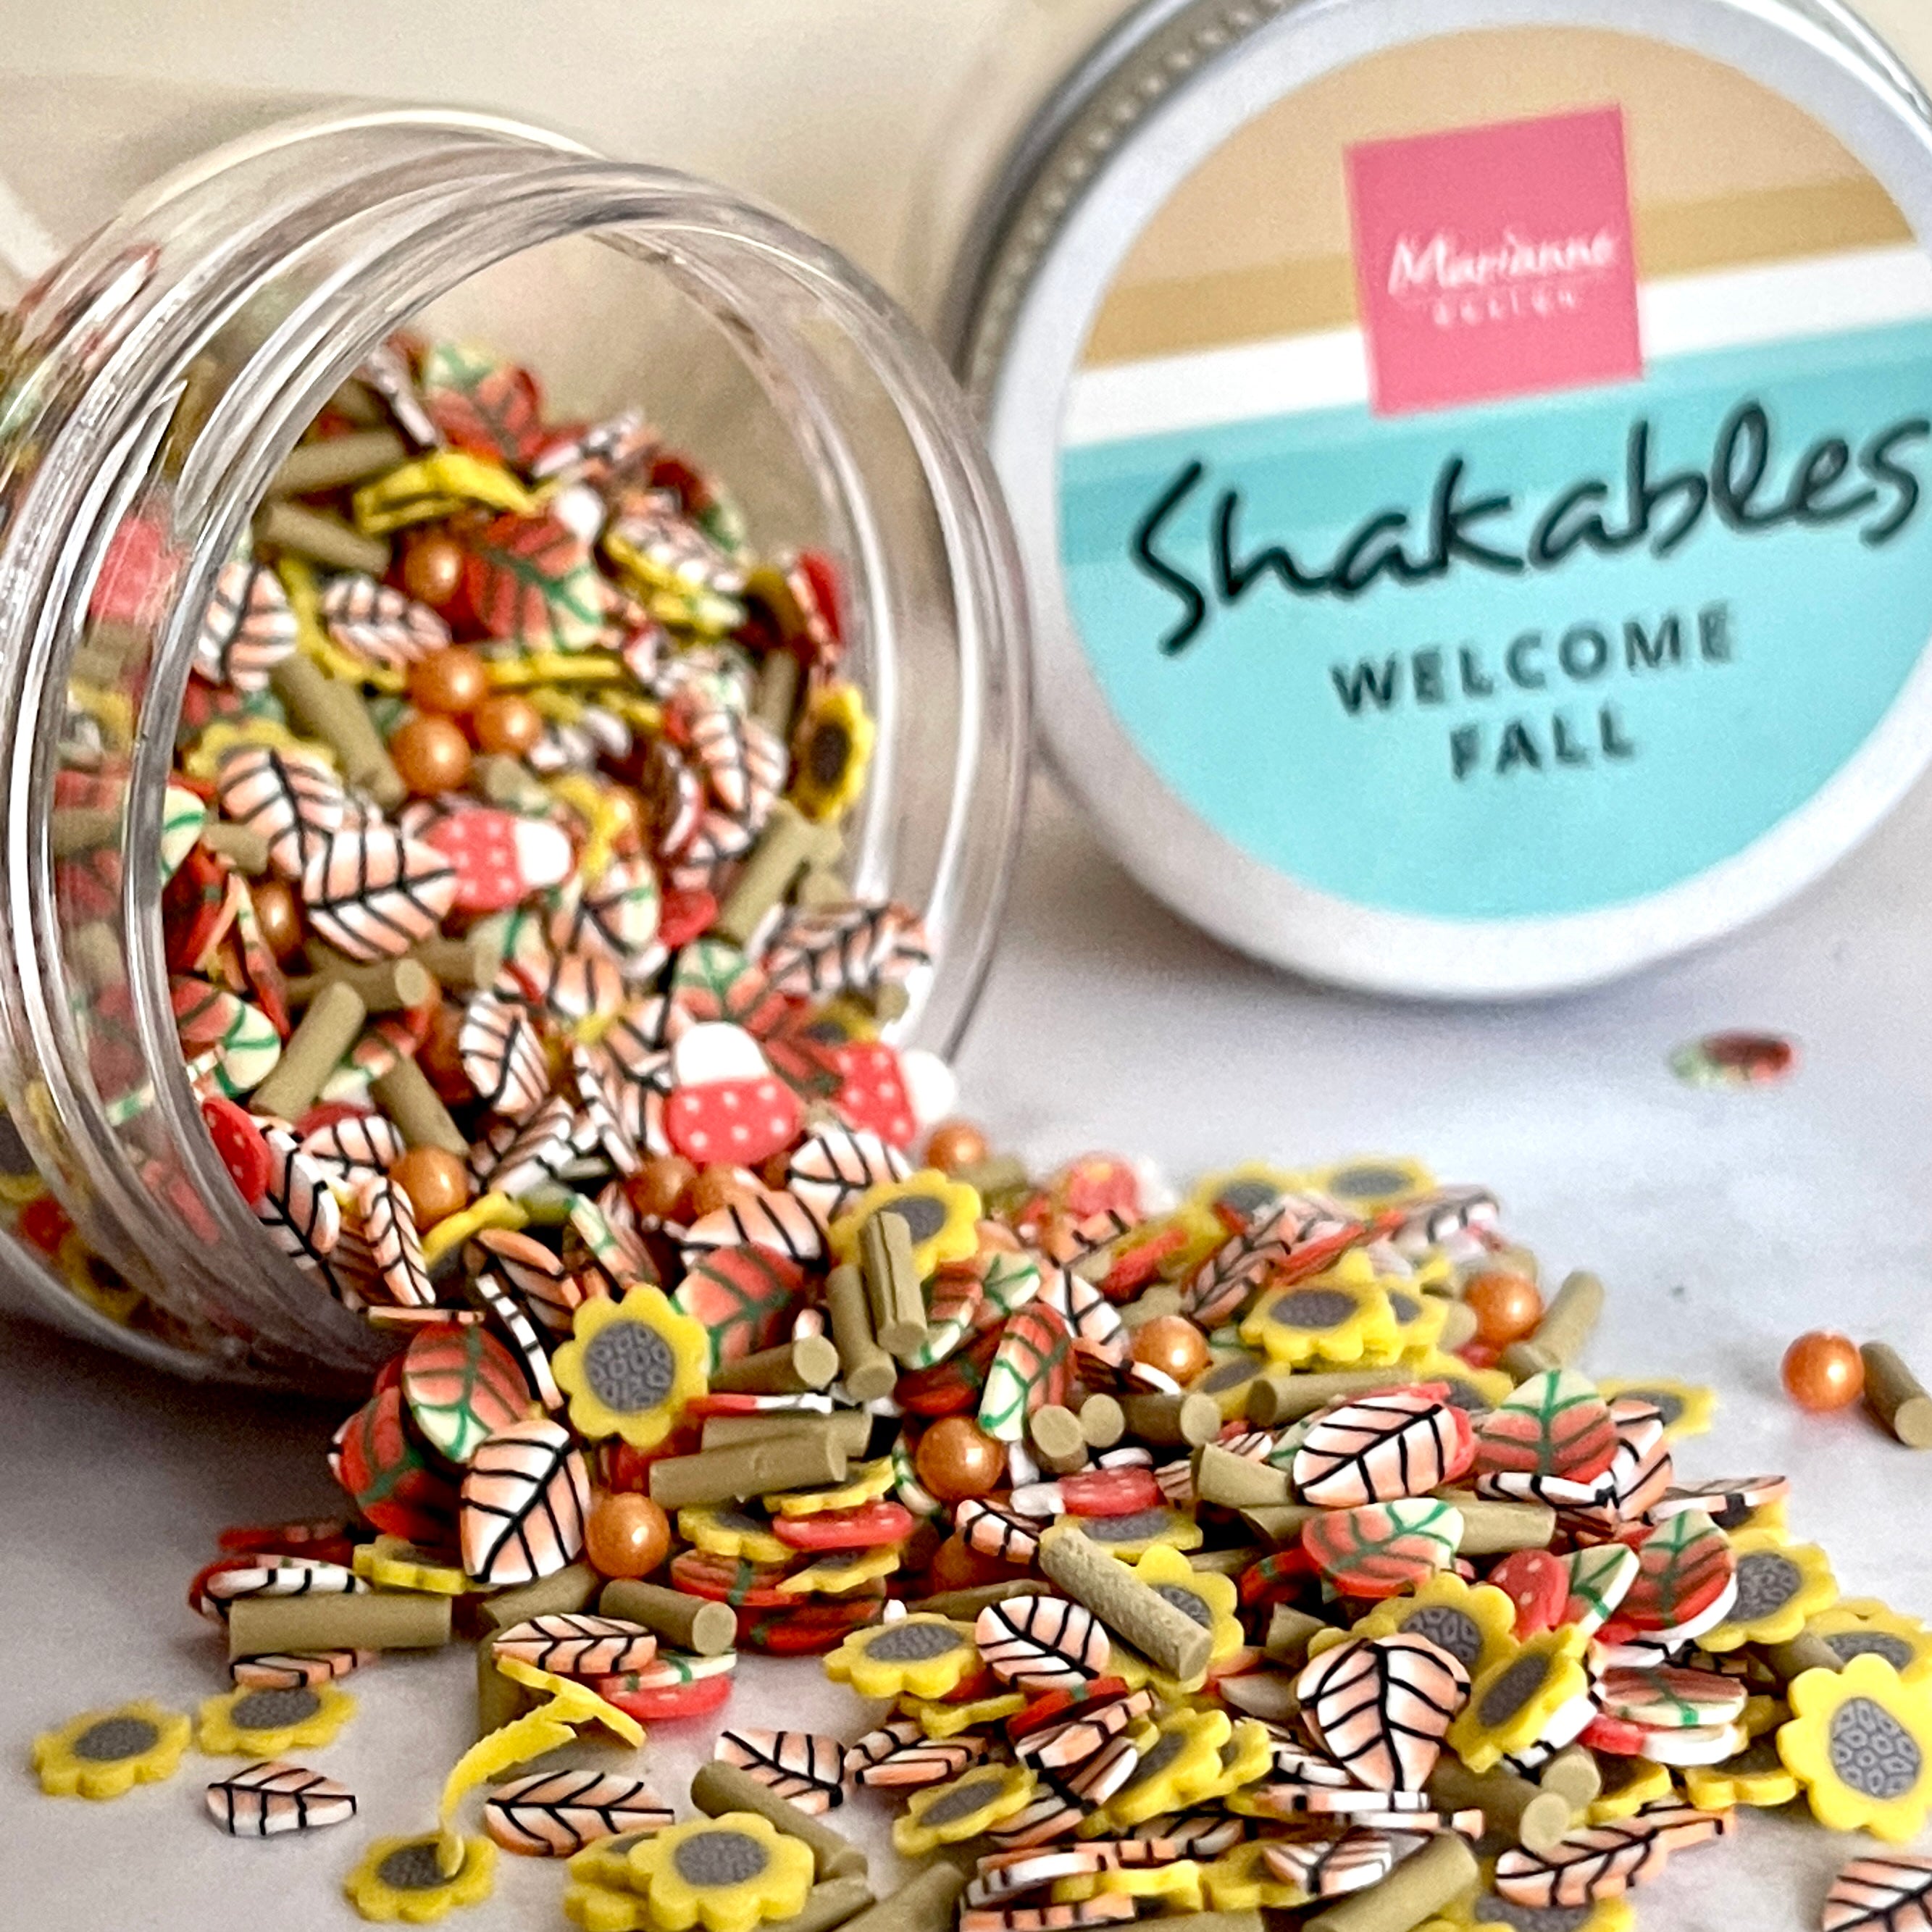 Marianne Design "Shakables - Welcome Fall"